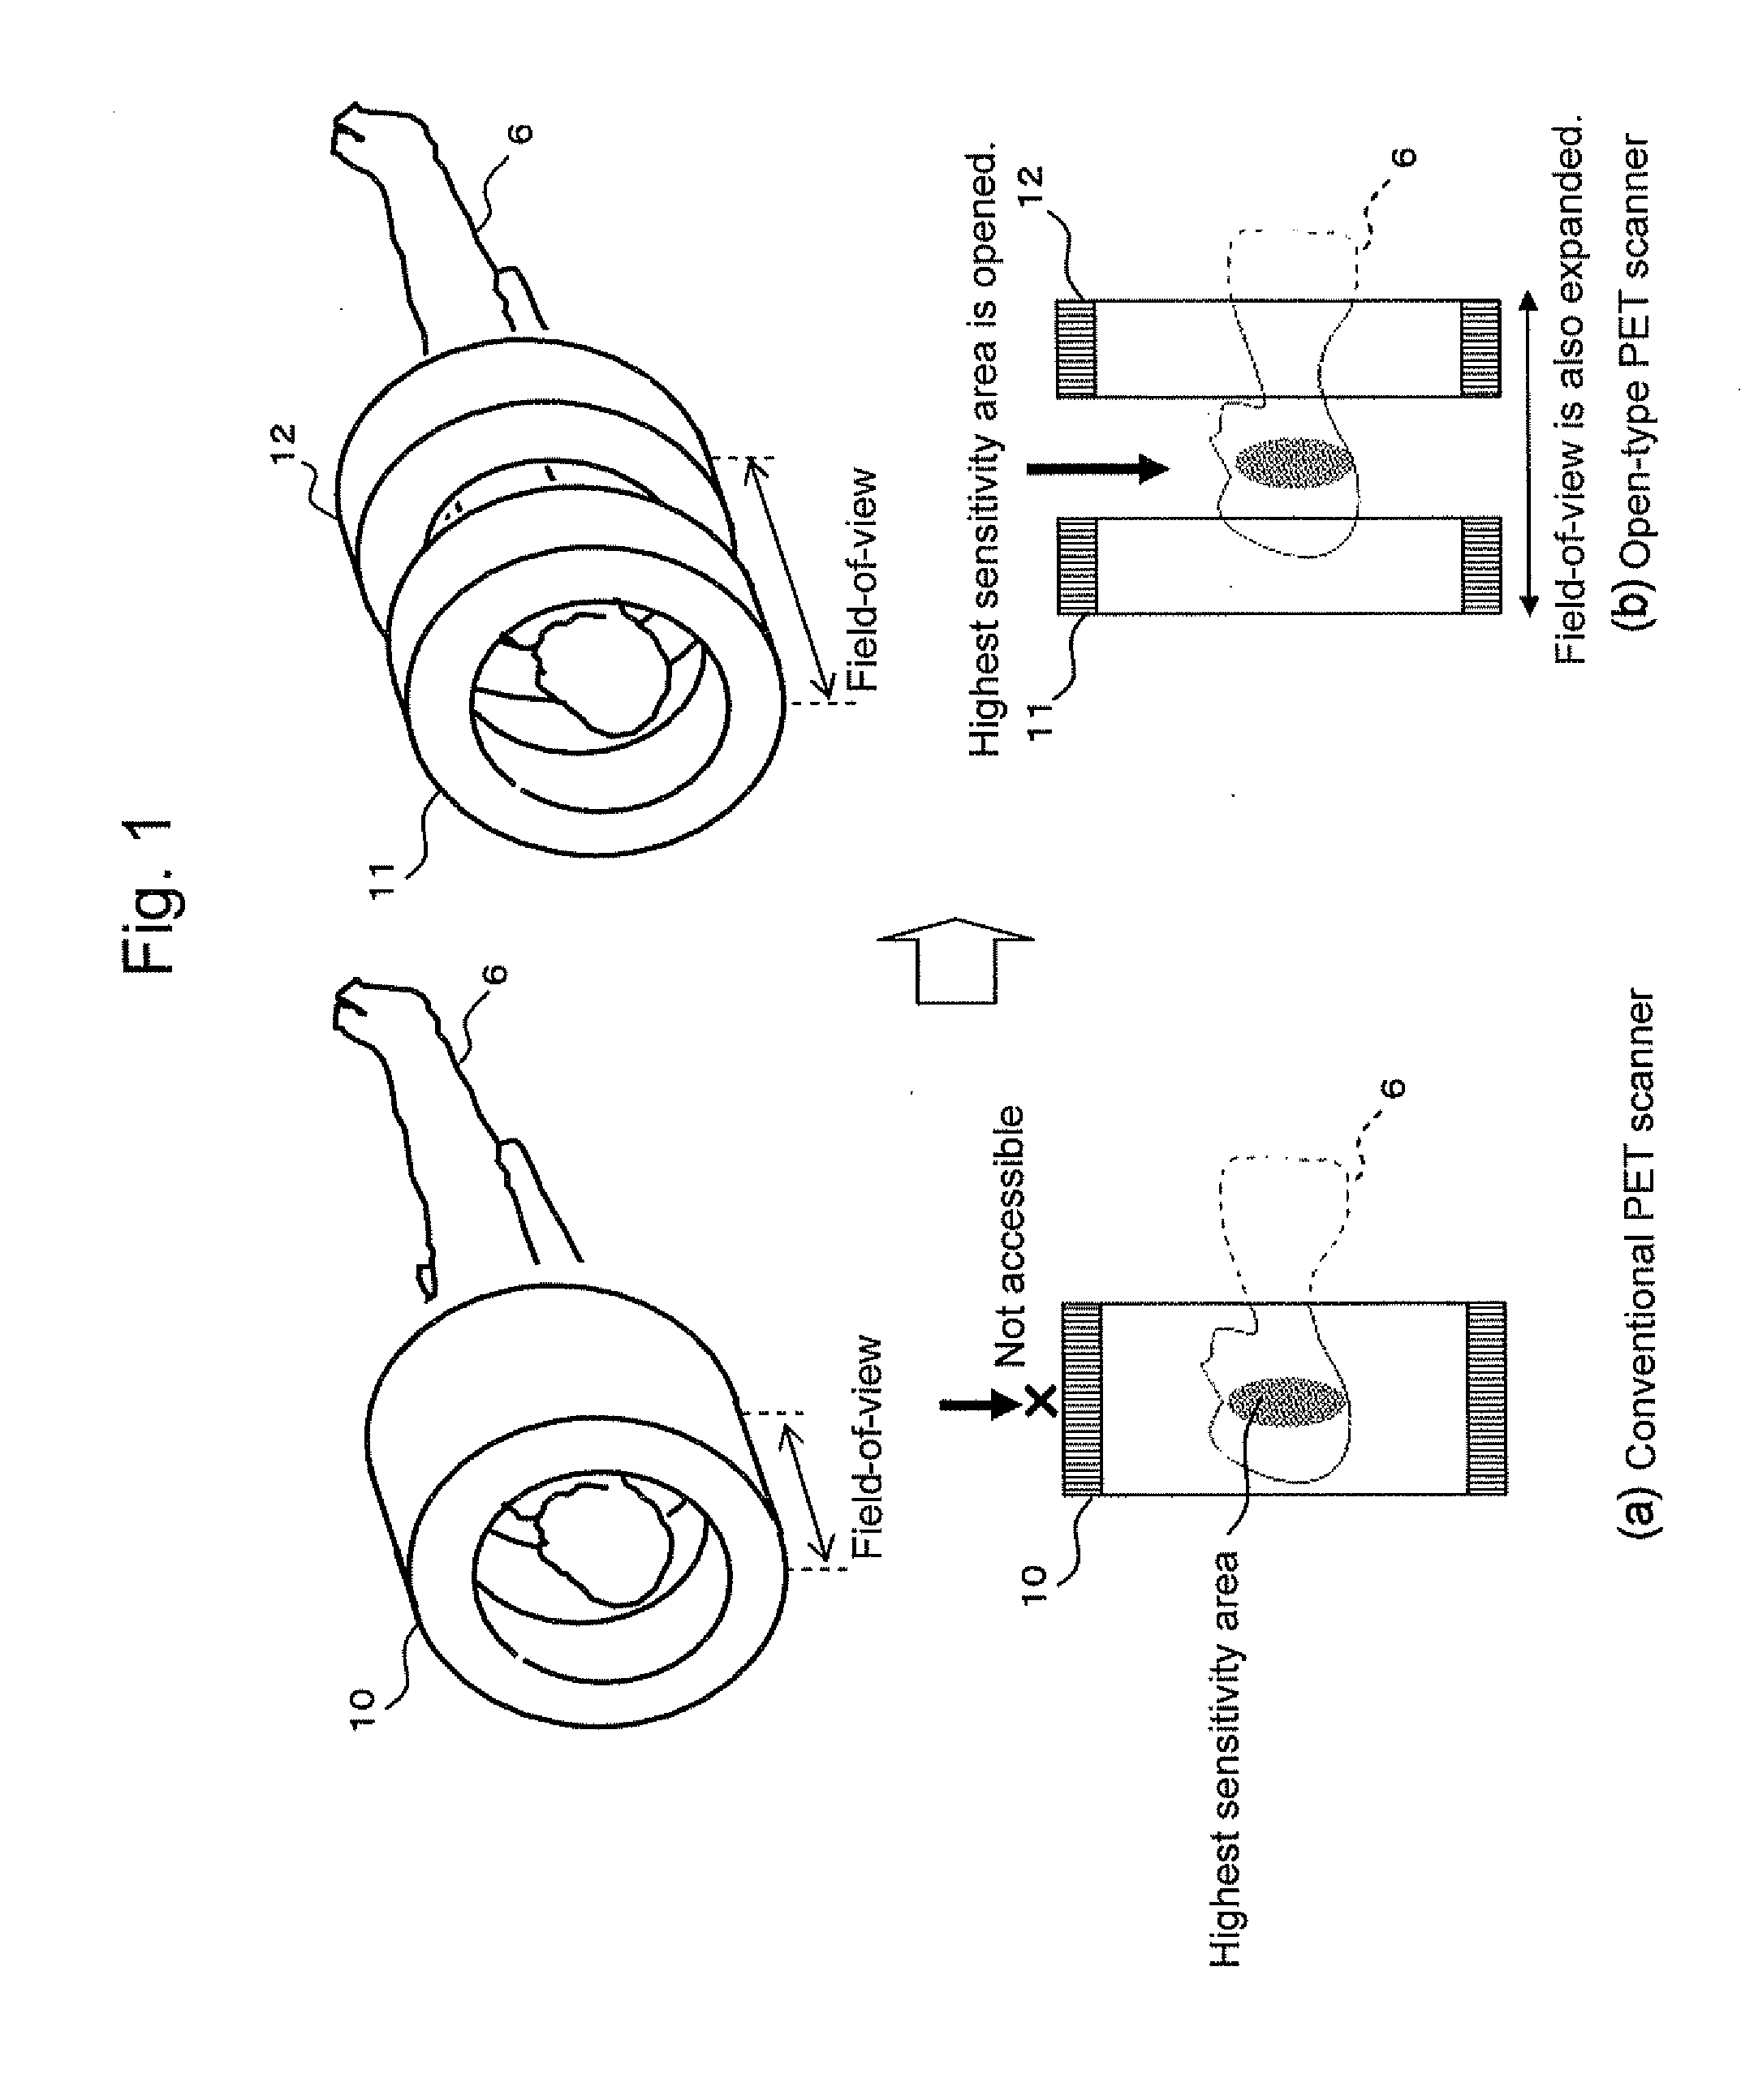 Combined radiation therapy/pet apparatus